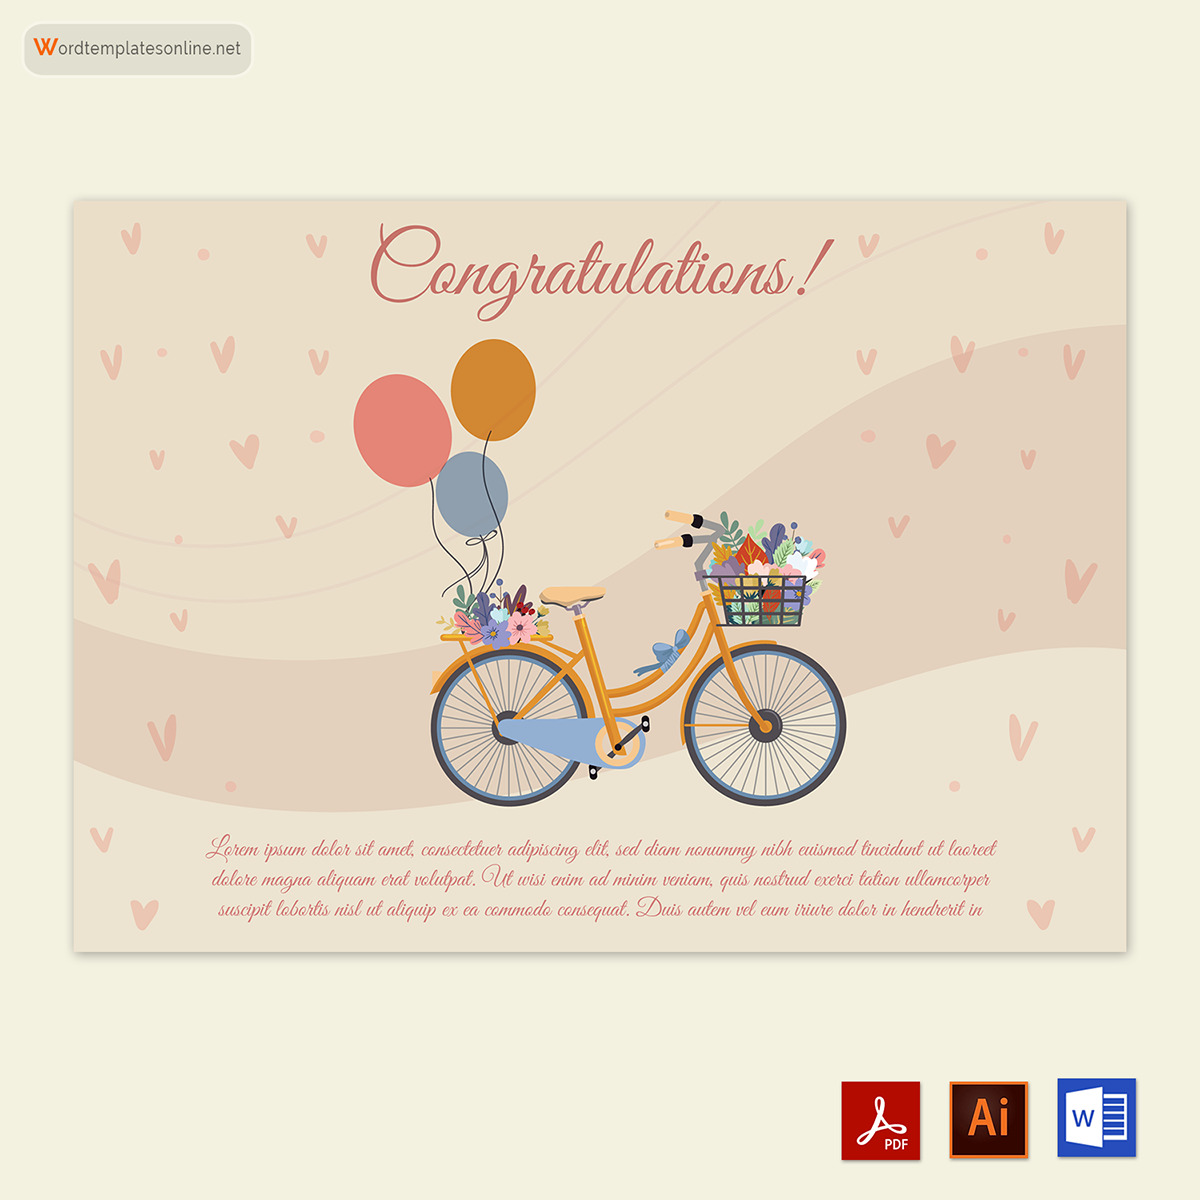 "Free congratulations greeting card format"